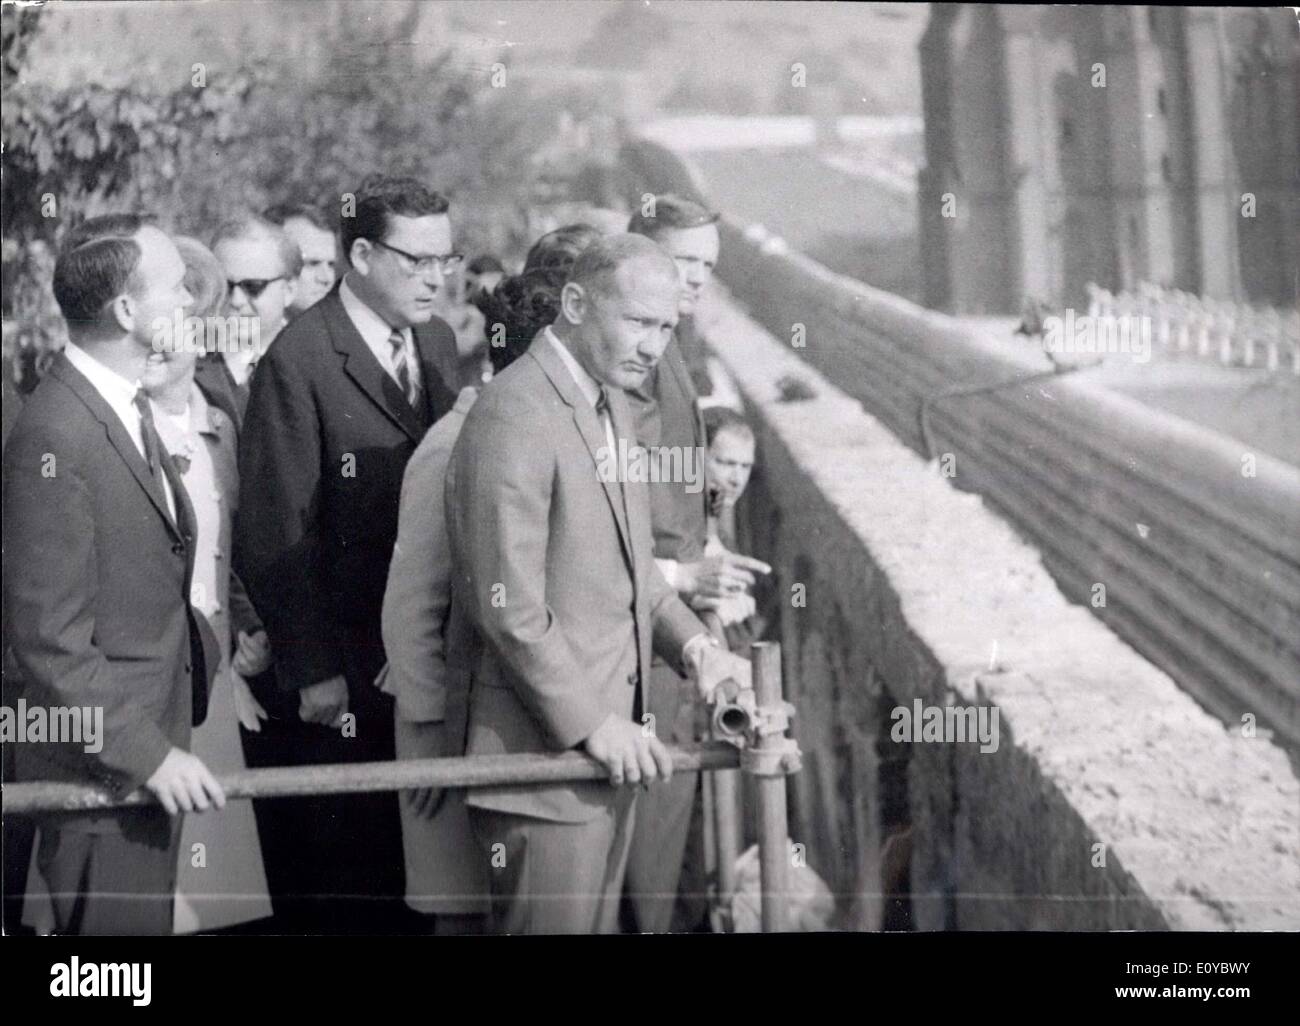 Oct. 13, 1969 - US - Astronauts at Berlin. Wall: Today the three moon-astronauts visits Berlin for one day. The take a sight- seeing- tour through Berlin and visit the wall in Berlin nauer Street. Photo shows f.l.t.r. Michael Collins. Mrs. Schutz, Governing Mayor Klaus Schutz, edwin Aldrin and Neil Armstrong. Stock Photo